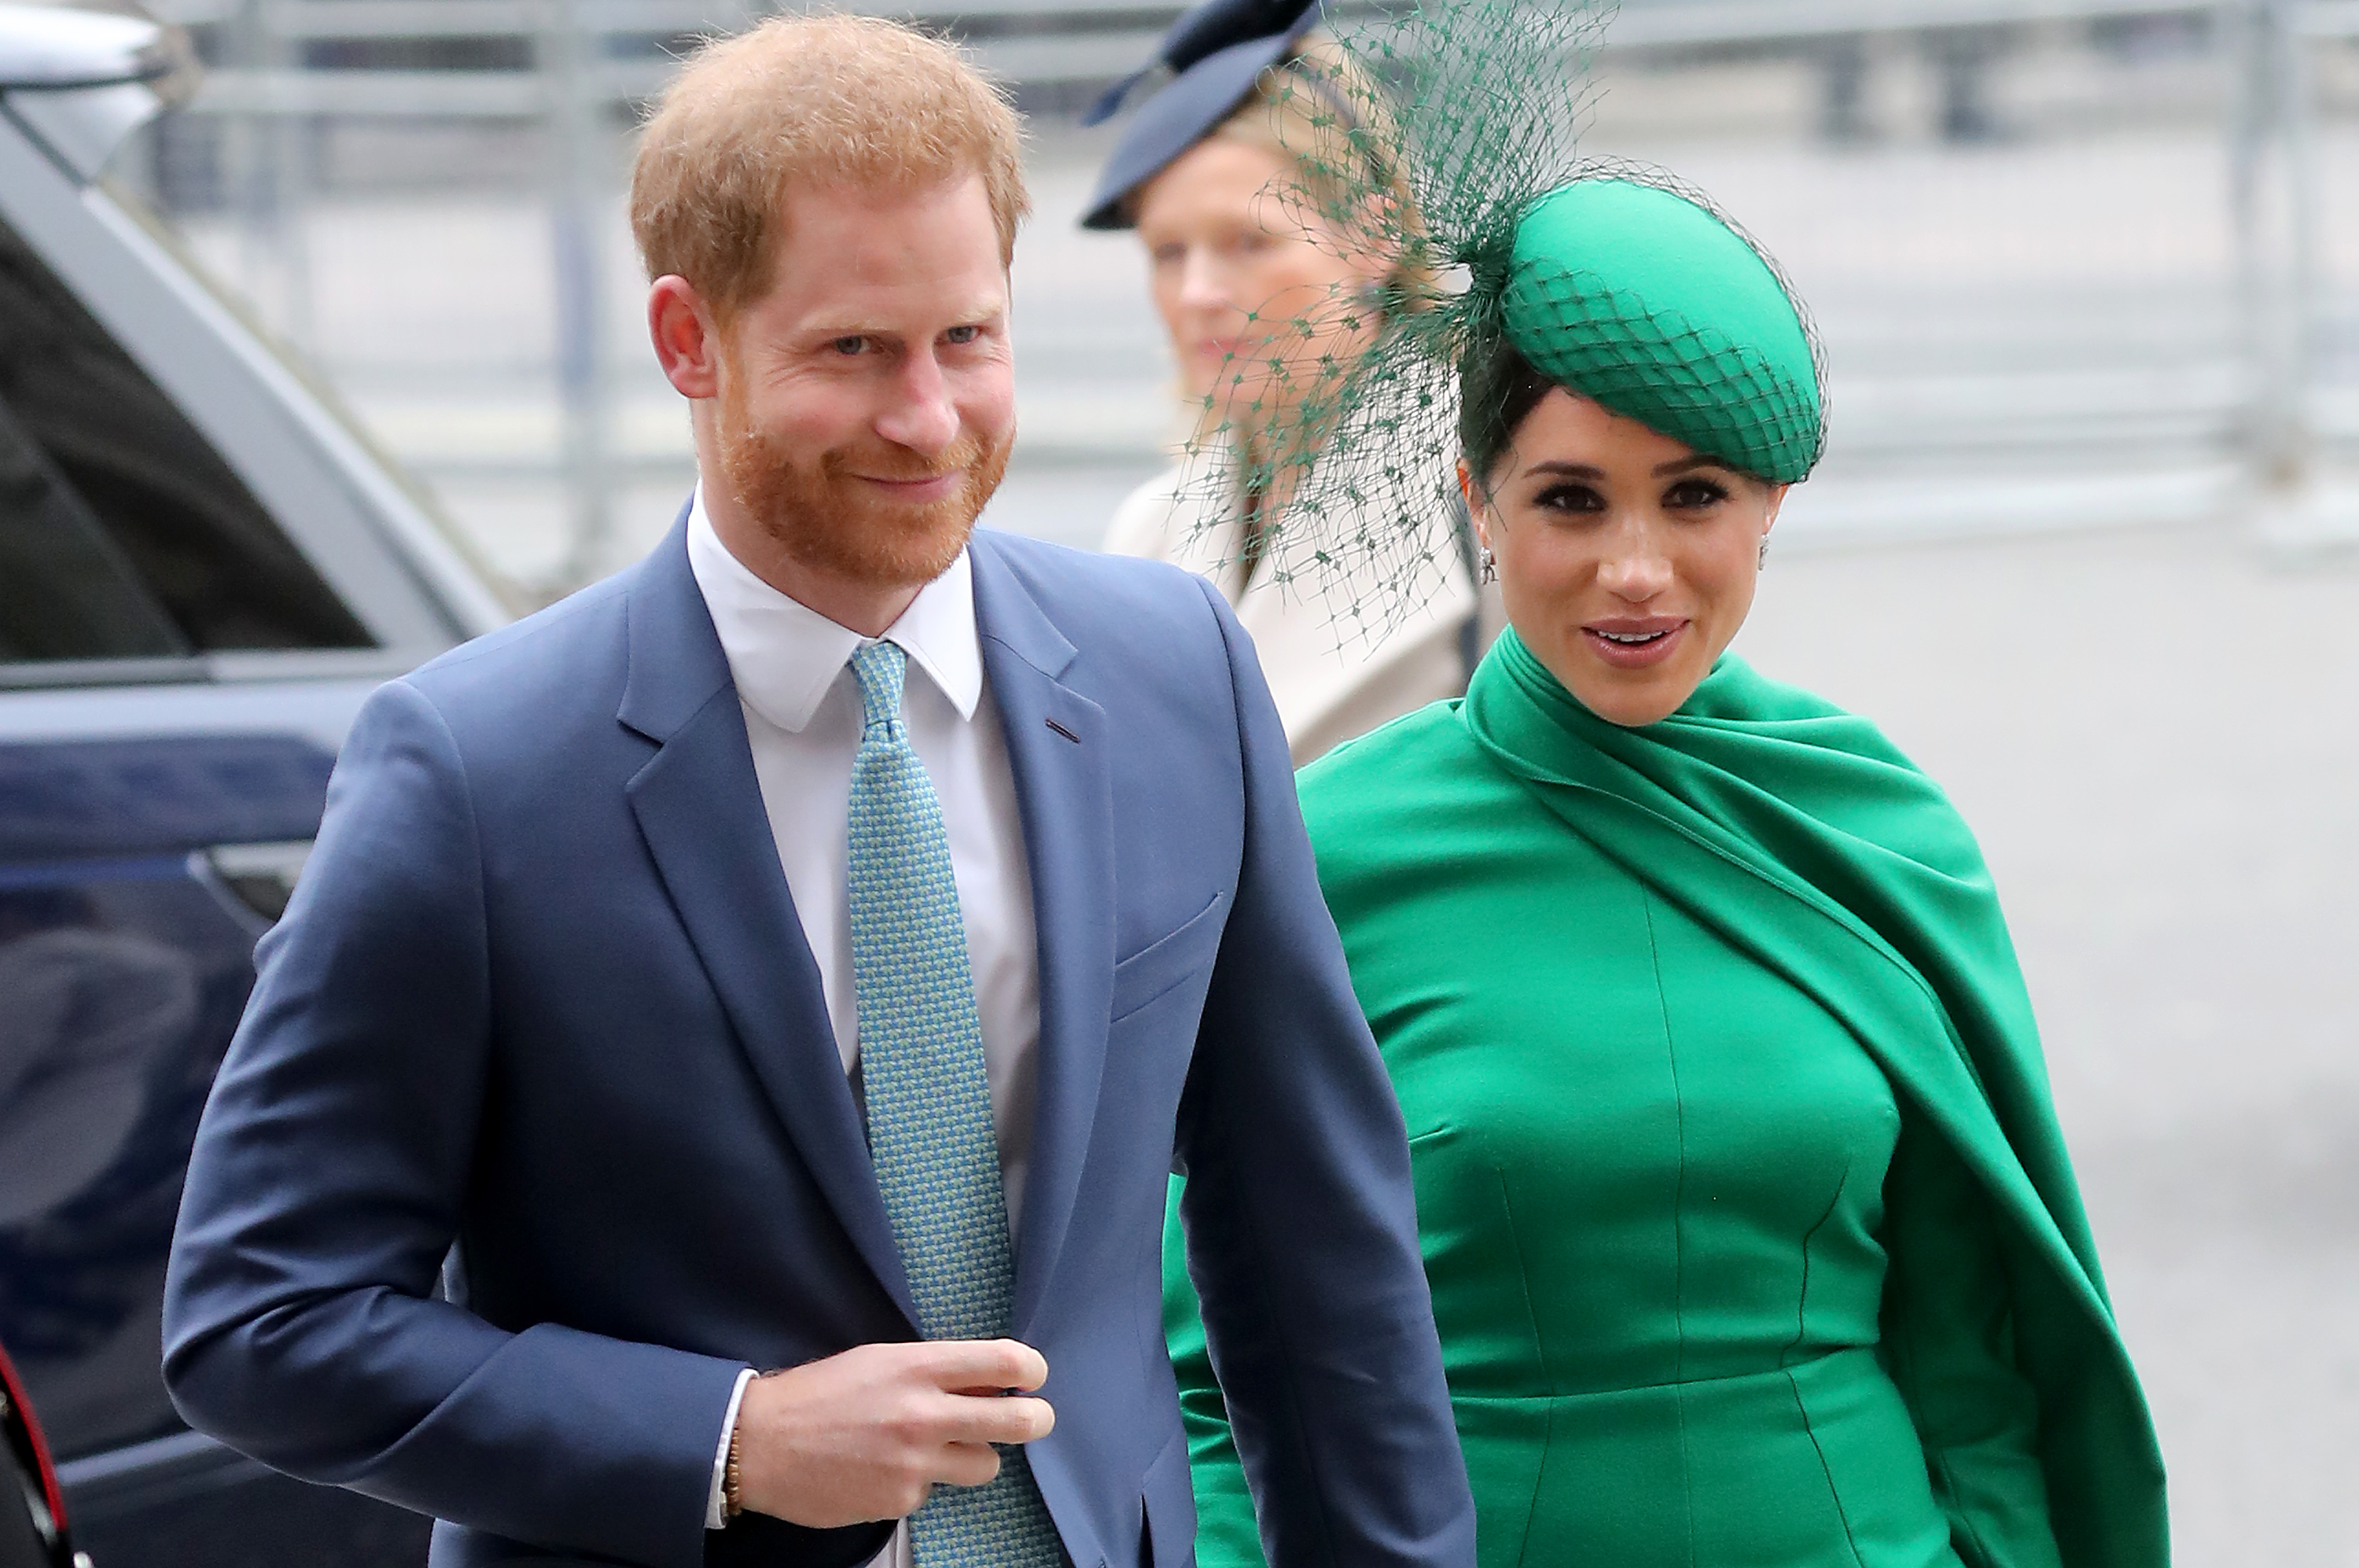 Prince Harry and Meghan Markle on March 09, 2020, in London, England. | Source: Getty Images